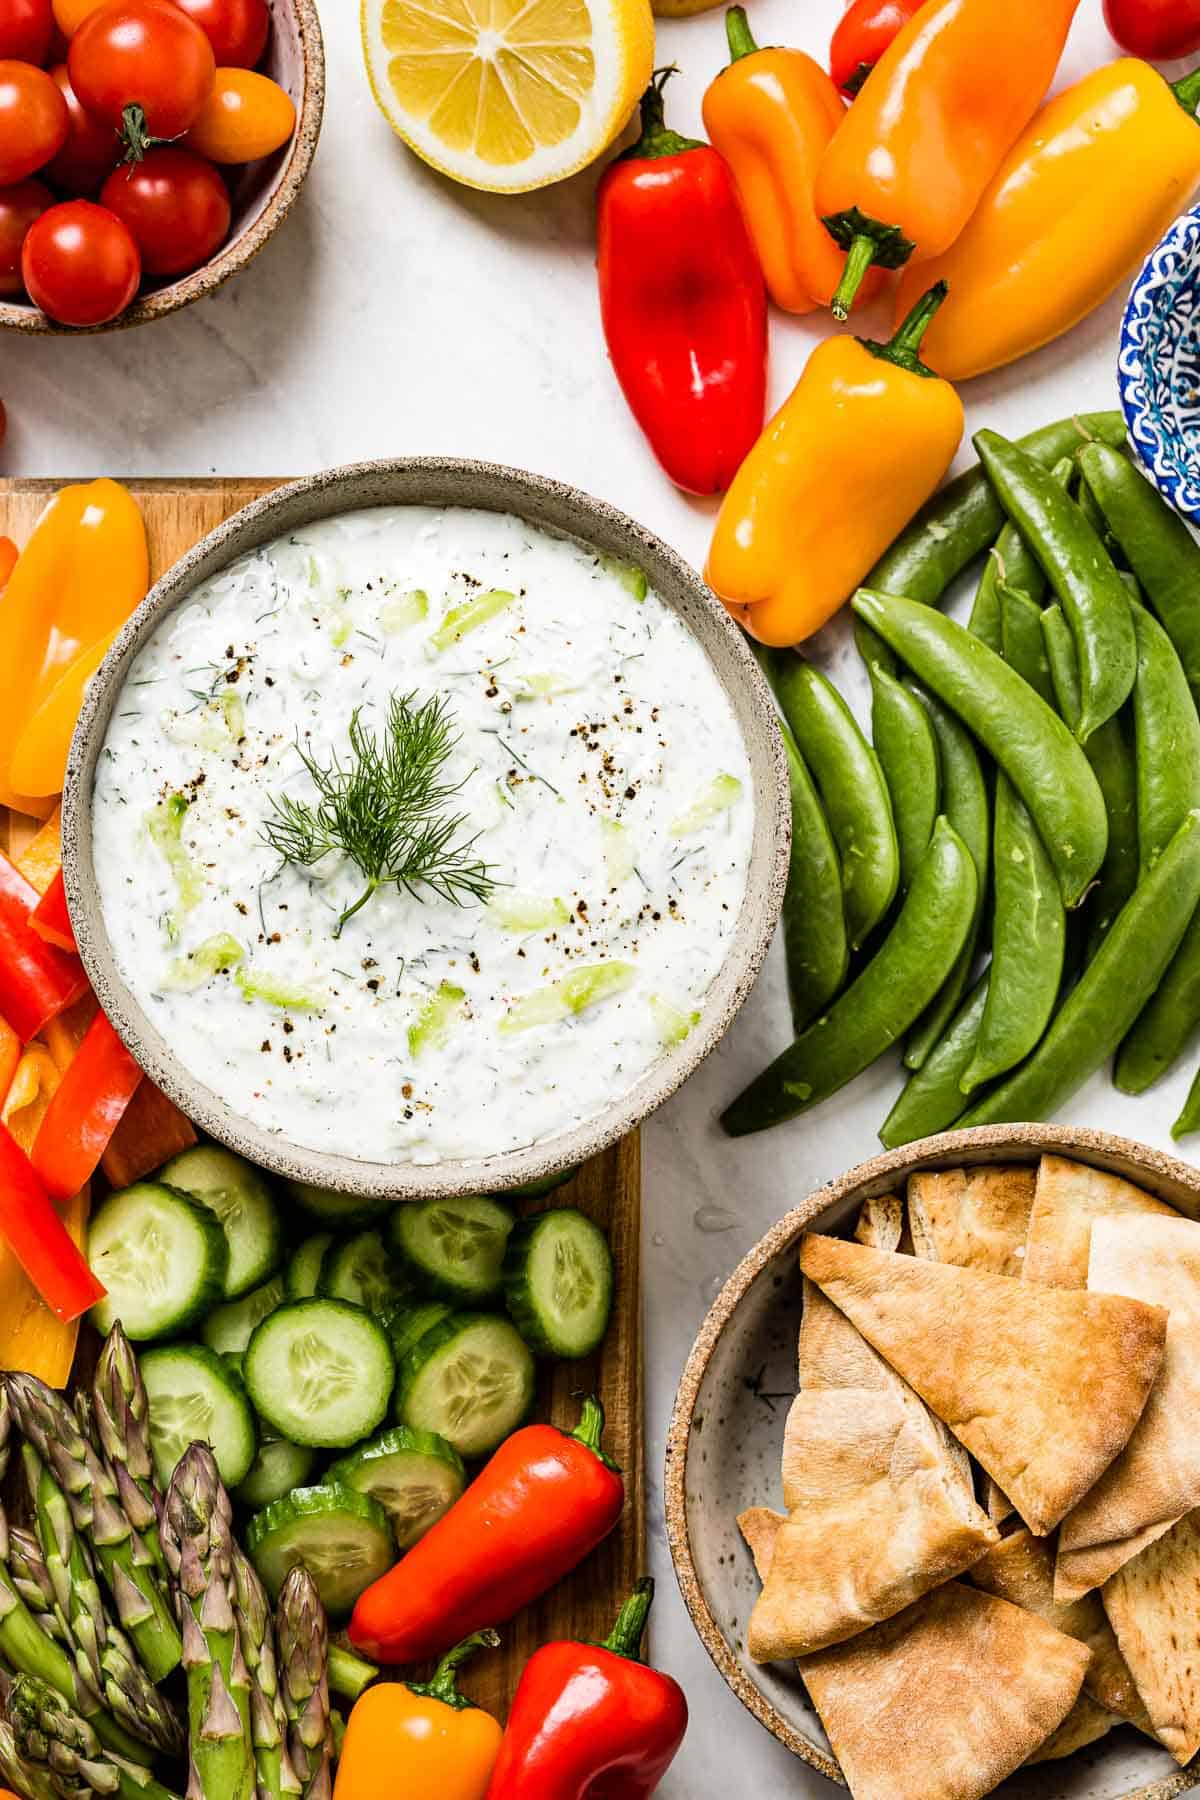 Authentic Tzatziki Sauce Recipe is served with colorful fresh vegetables.